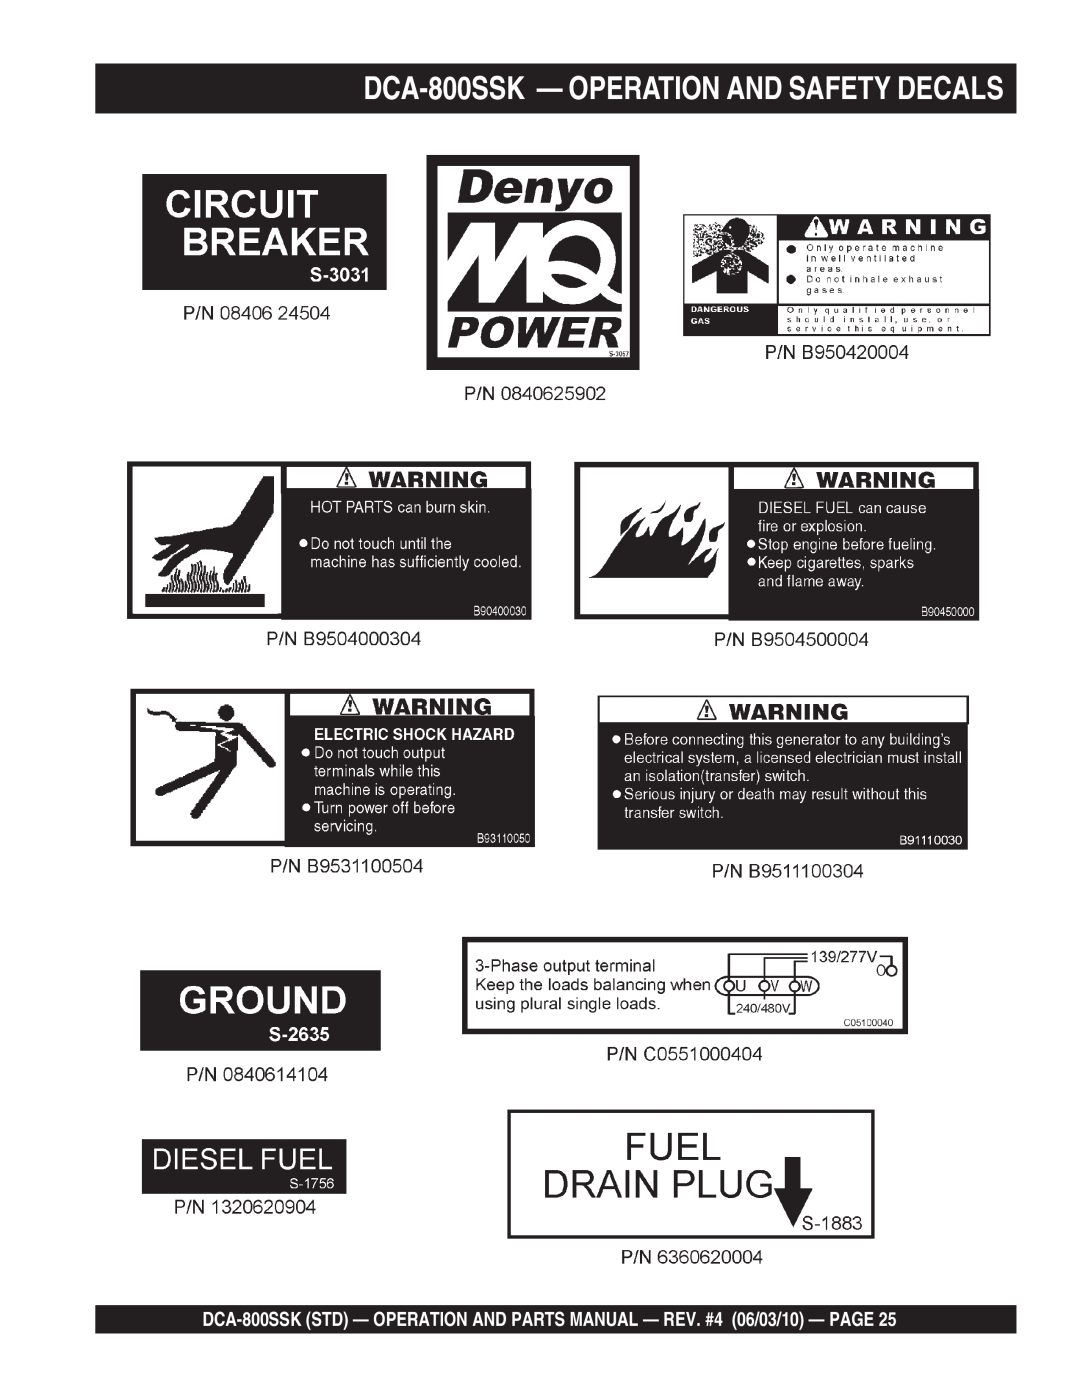 Multiquip operation manual DCA-800SSK - OPERATION AND SAFETY DECALS 